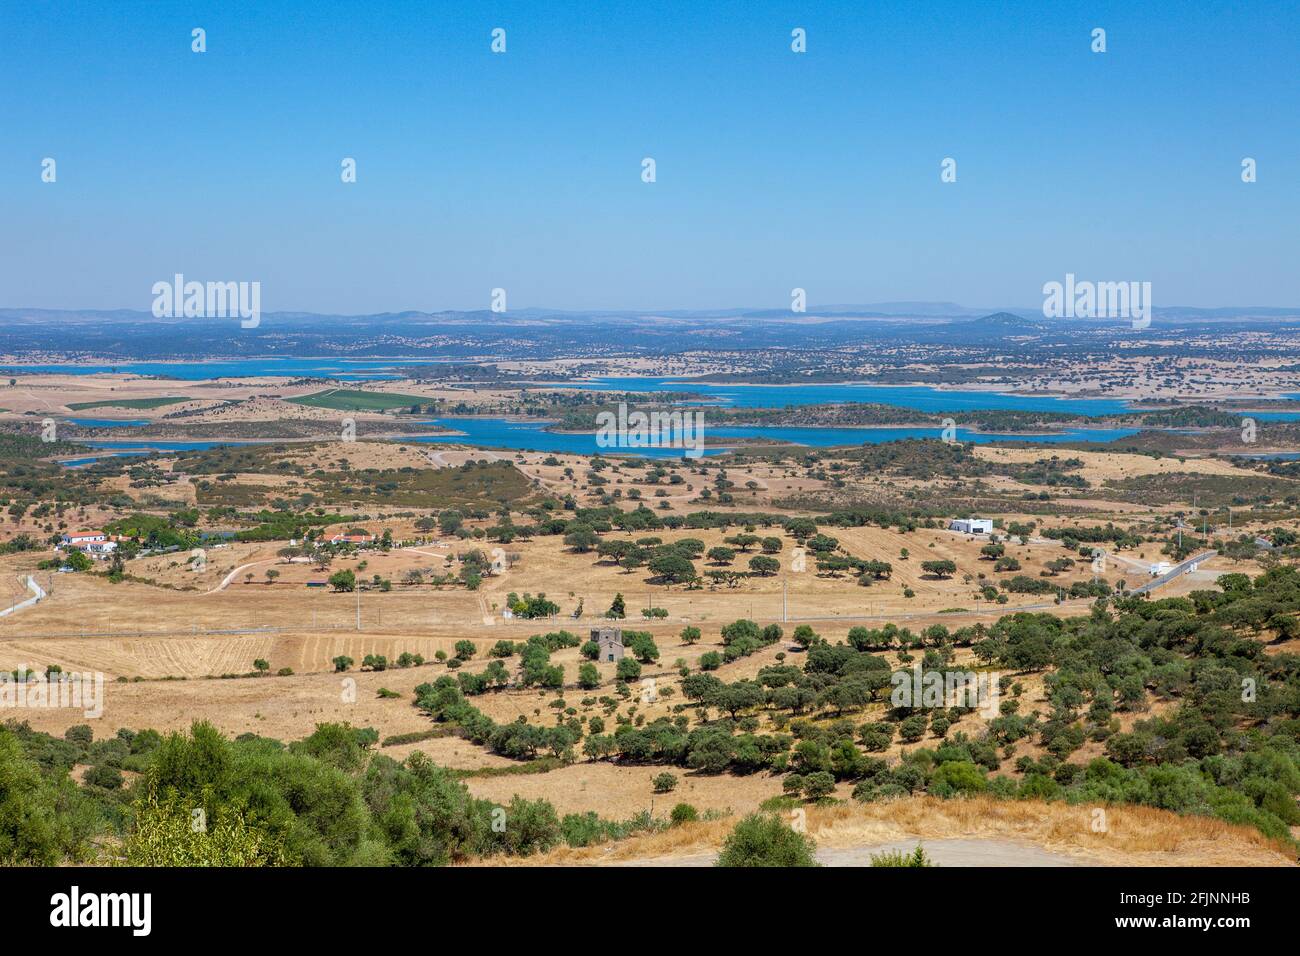 A view of the Alqueva Dam, the largest artificial lake in Europe, seen from the hilltop village of Monsaraz in the Alentejo region, Portugal Stock Photo